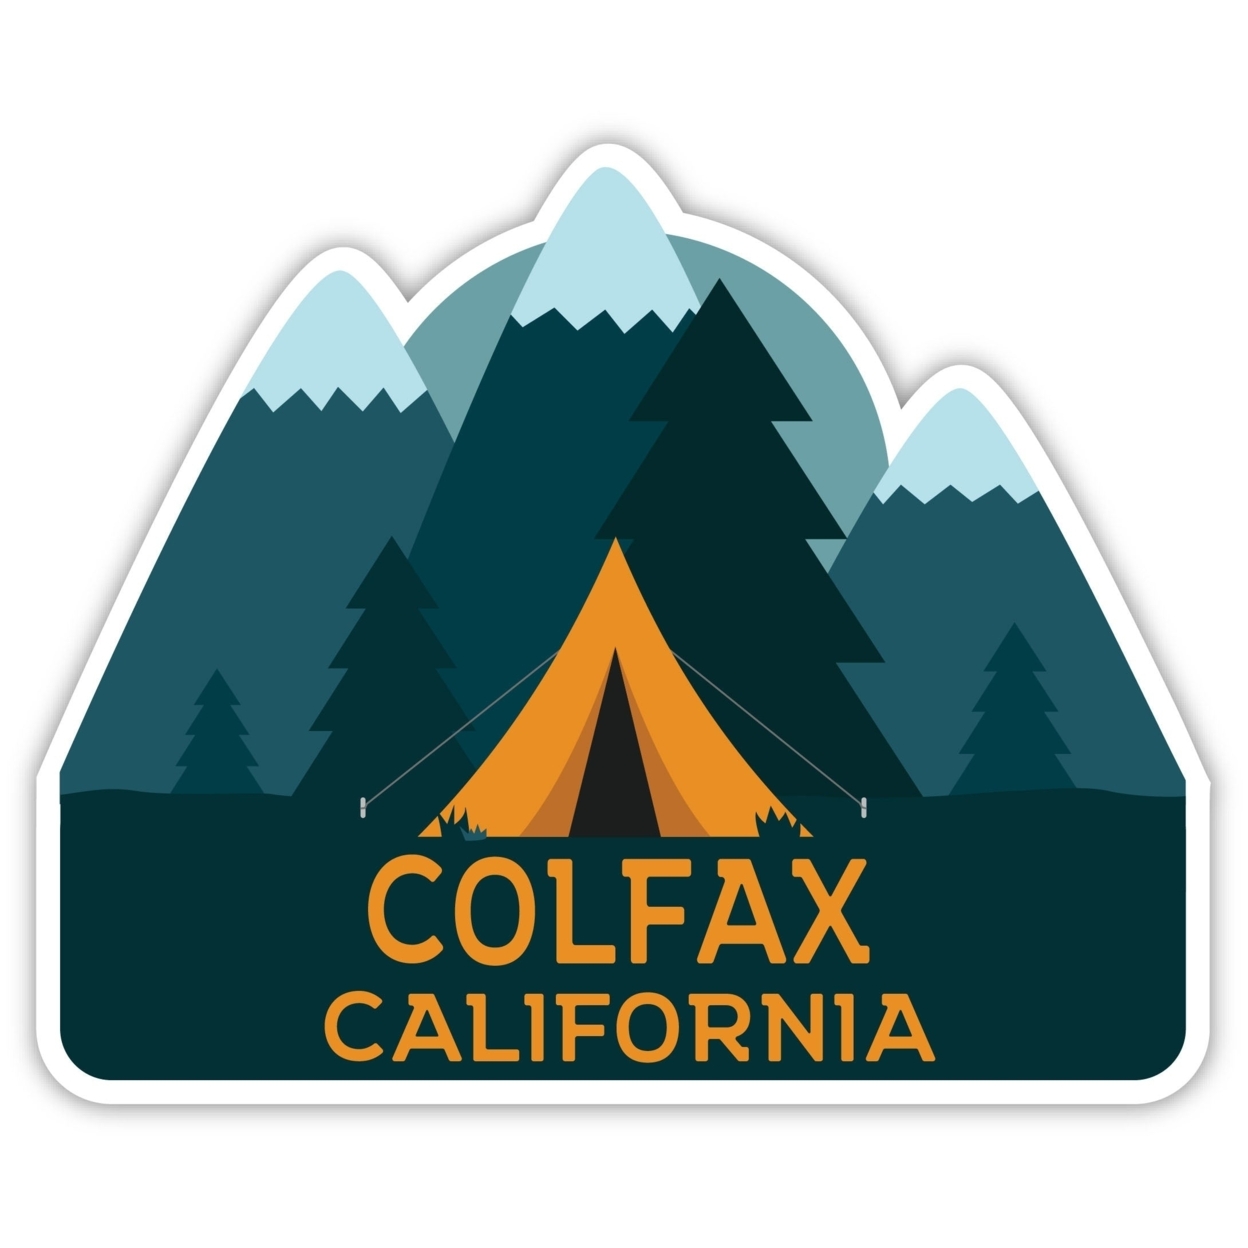 Colfax California Souvenir Decorative Stickers (Choose Theme And Size) - 4-Pack, 10-Inch, Tent